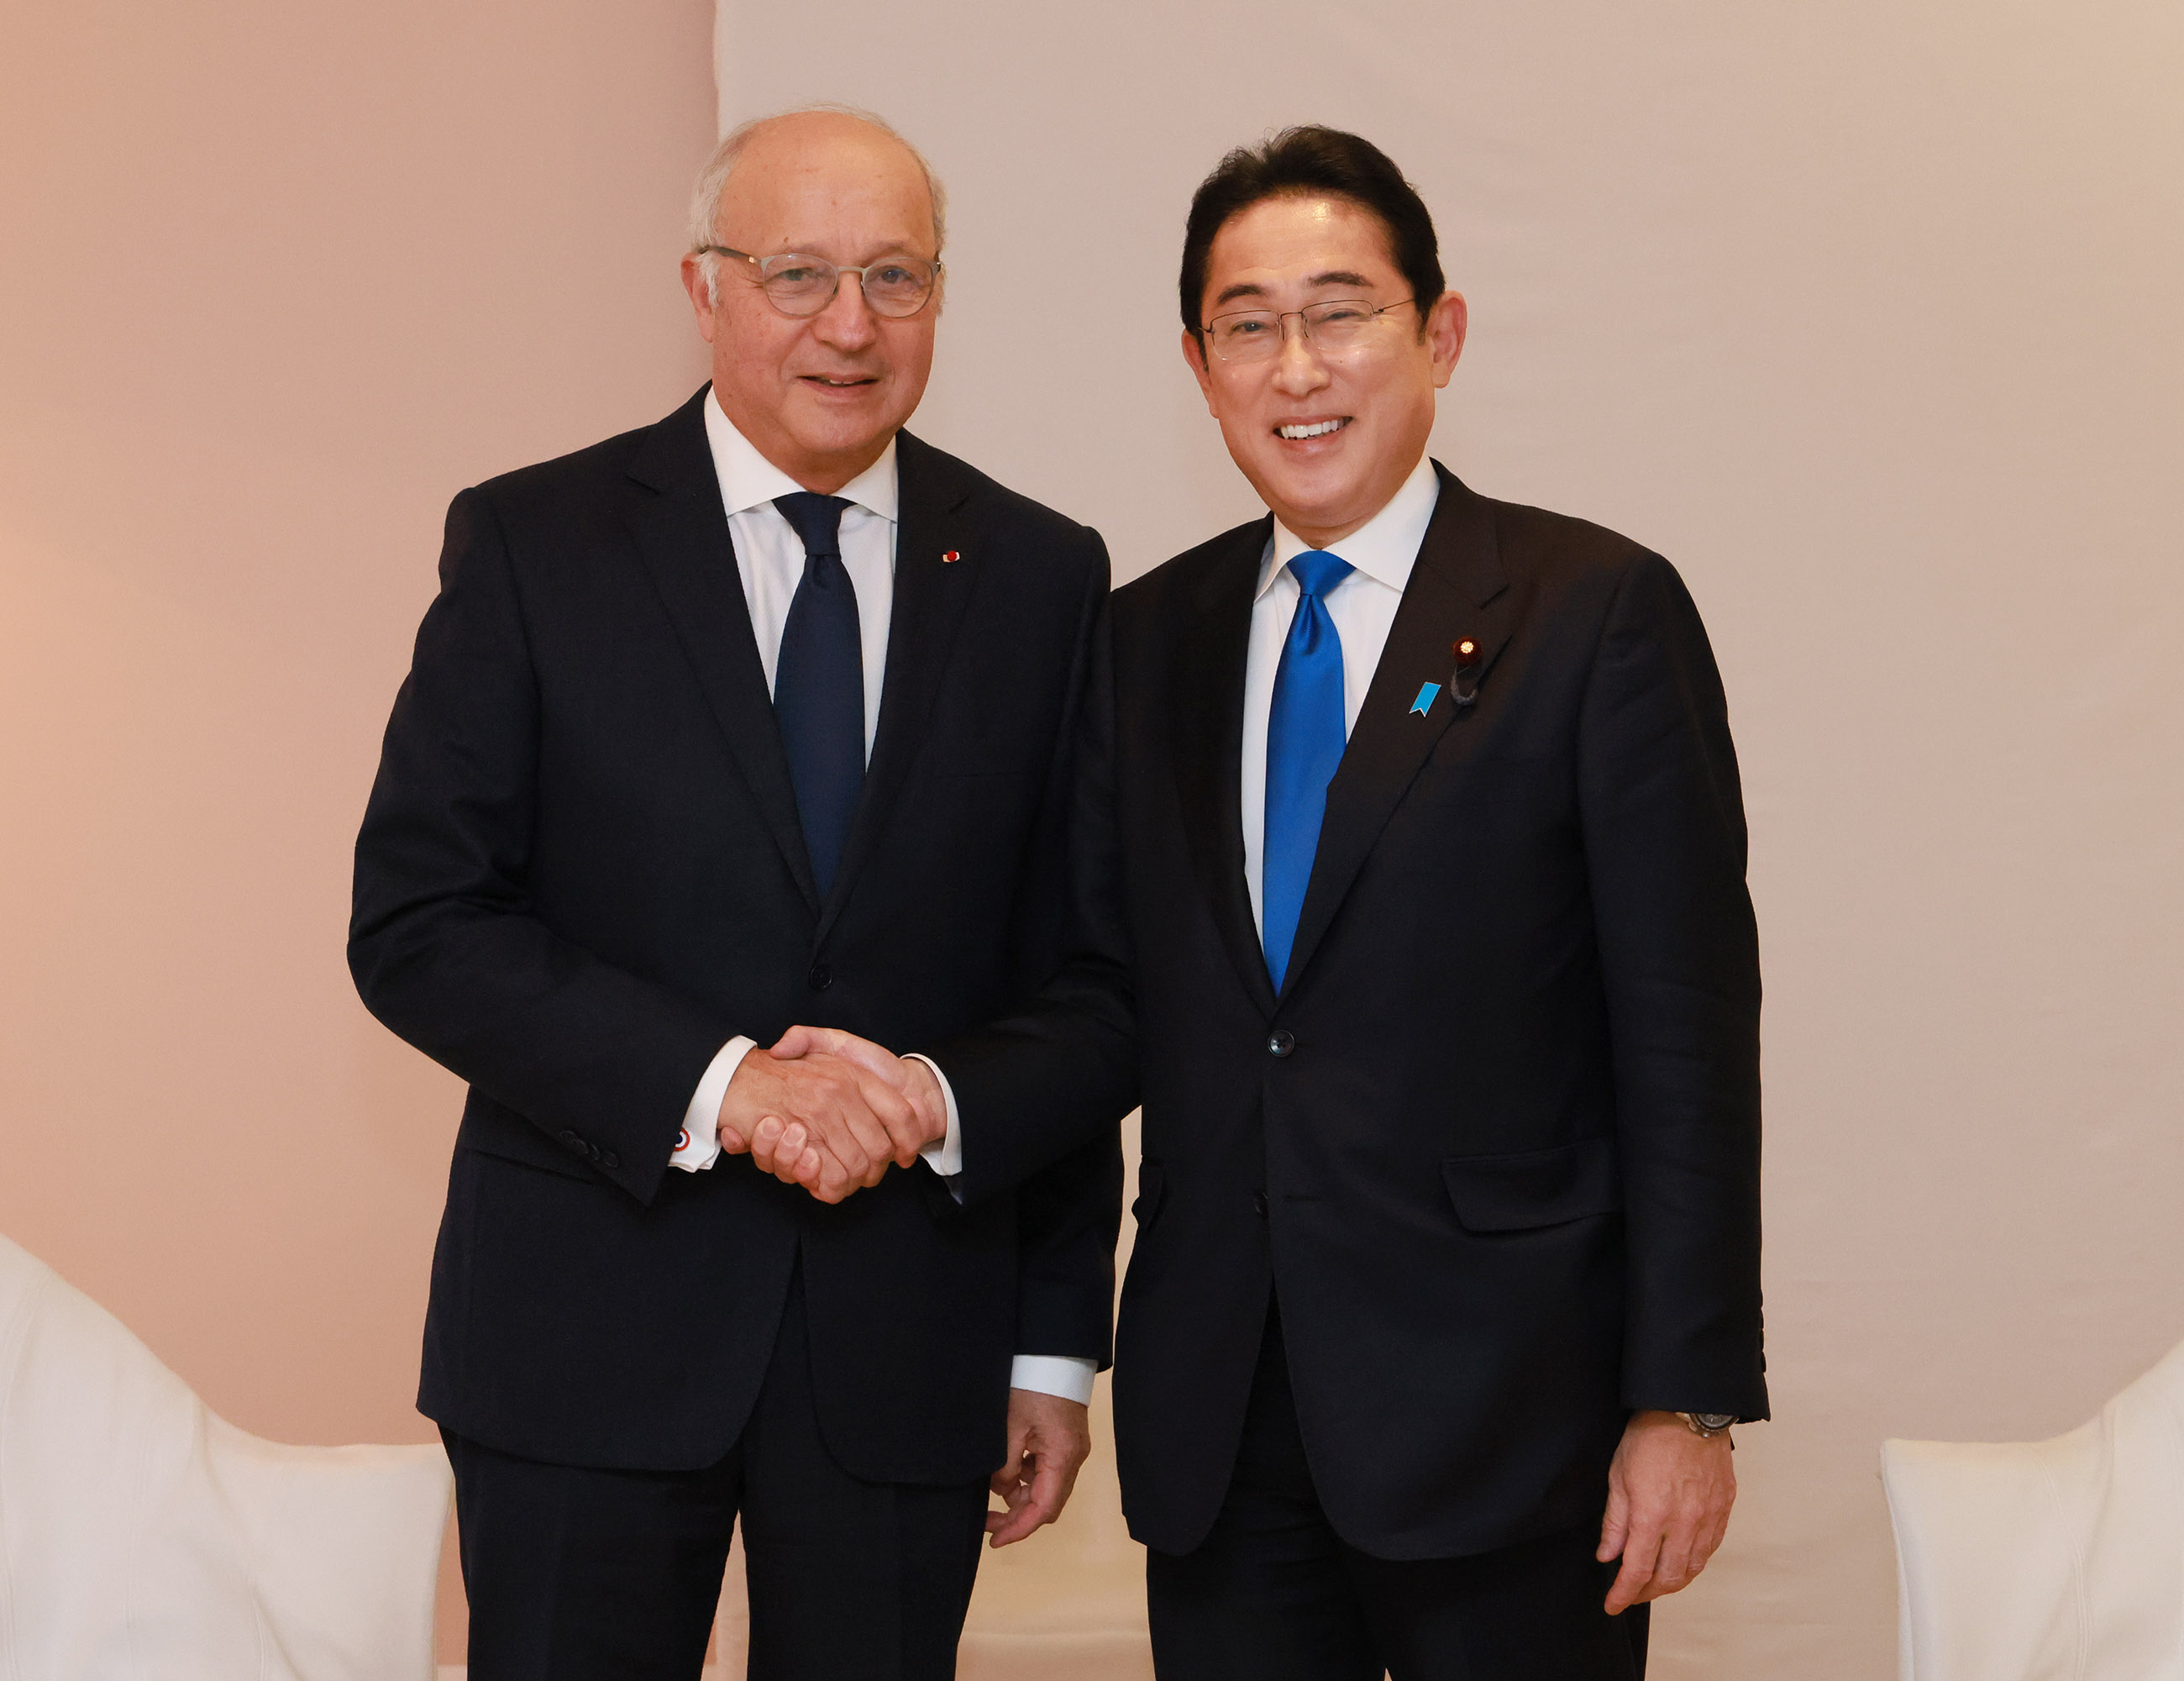 Prime Minister Kishida holding a meeting with President Fabius of the Constitutional Council